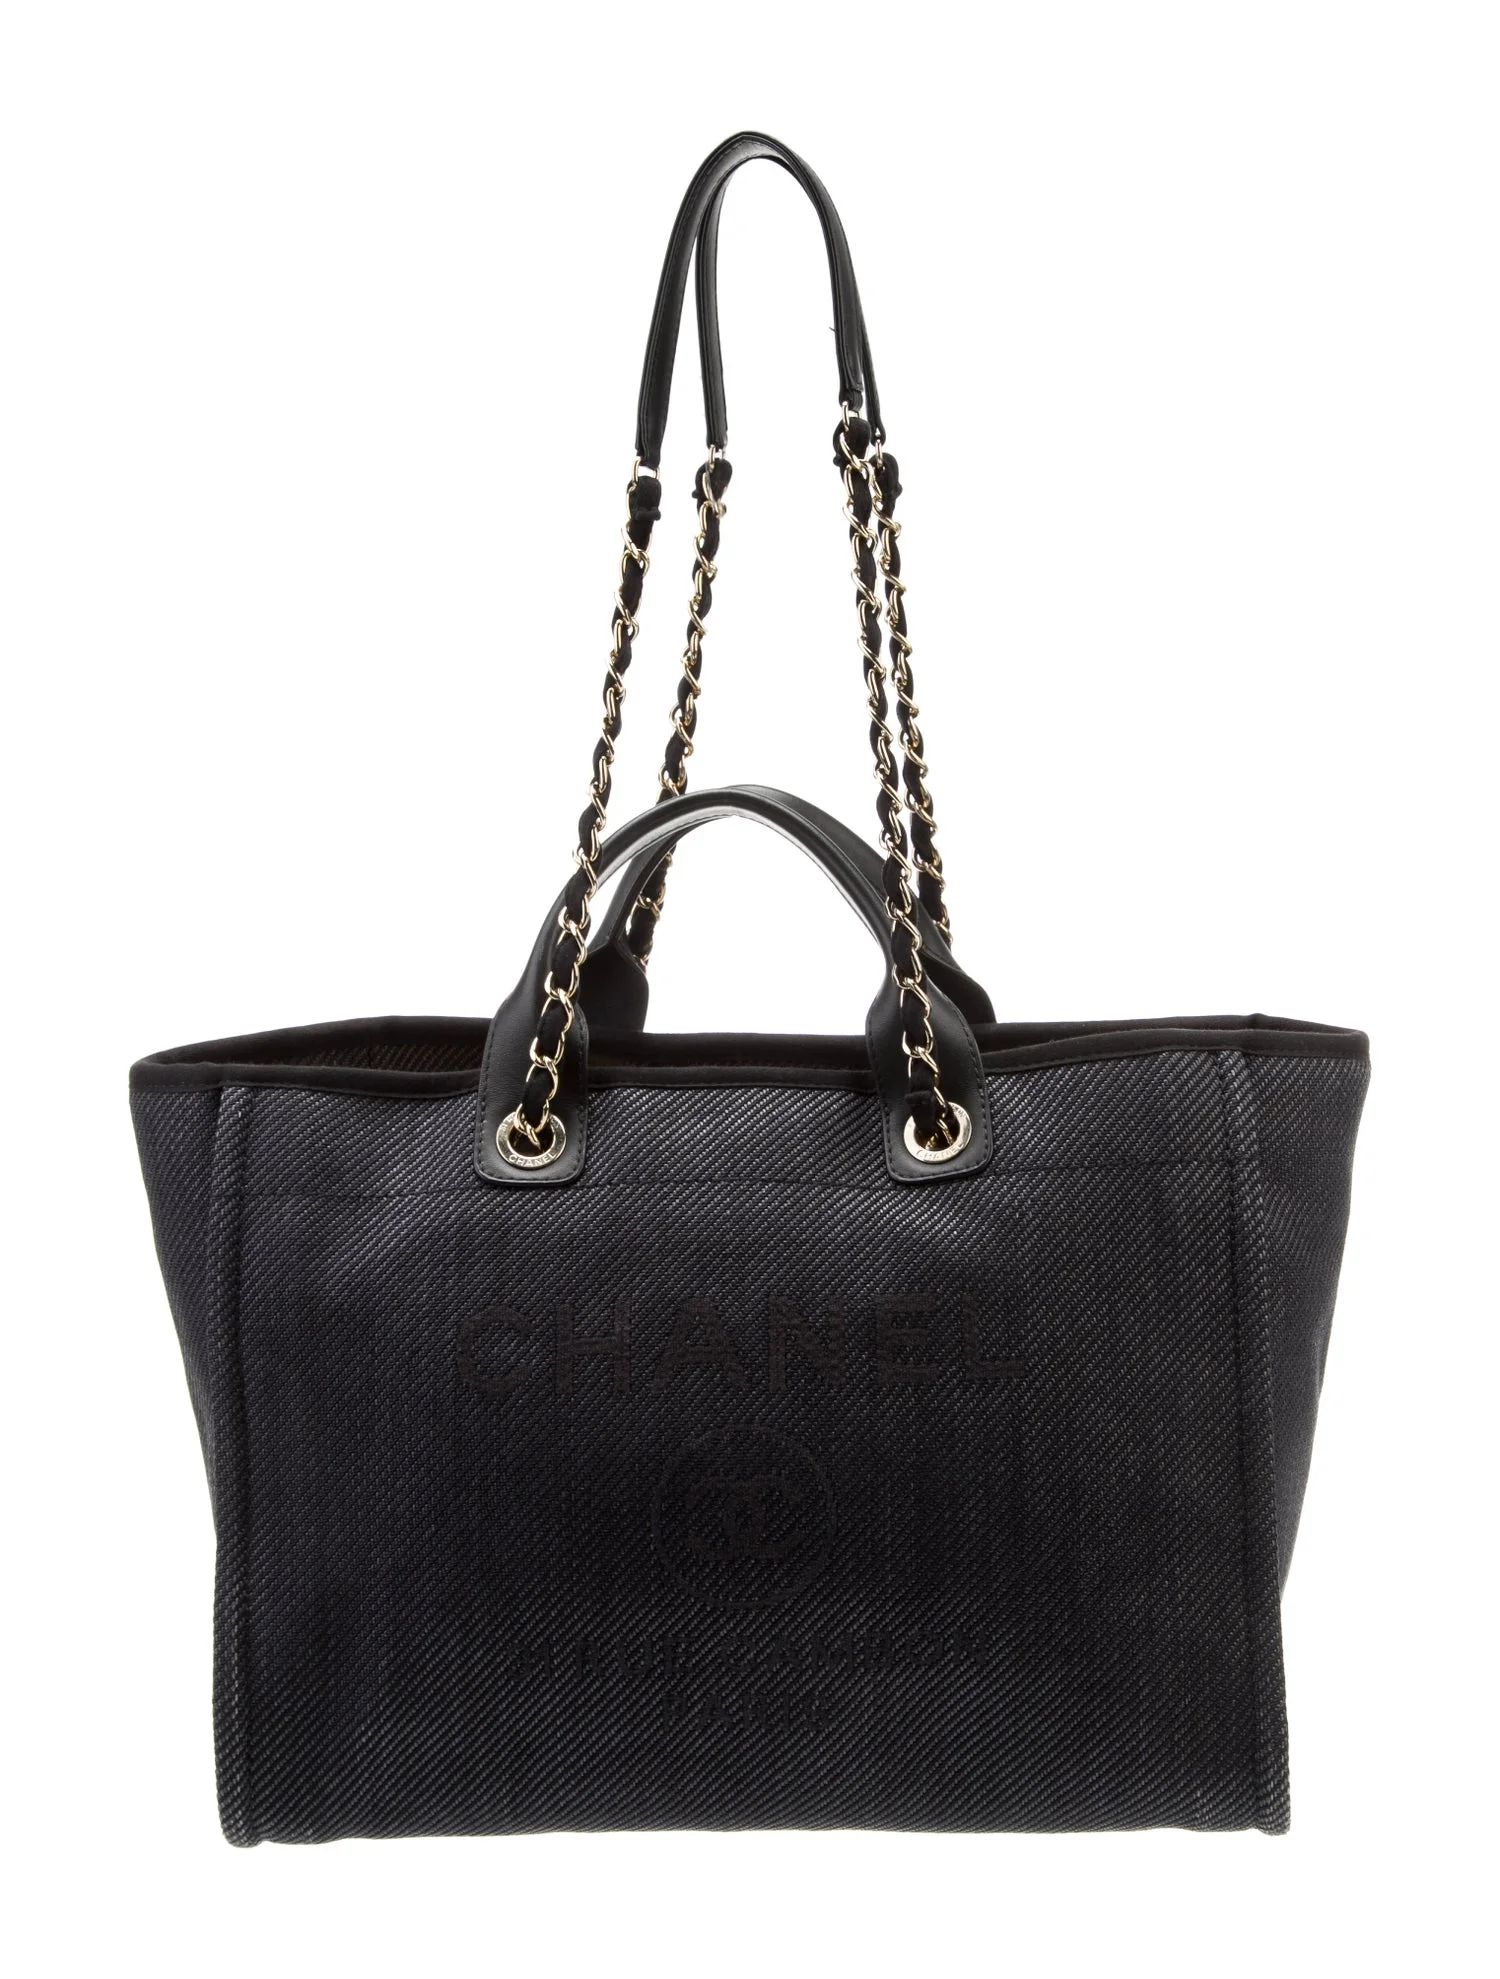 Medium Deauville Tote | The RealReal